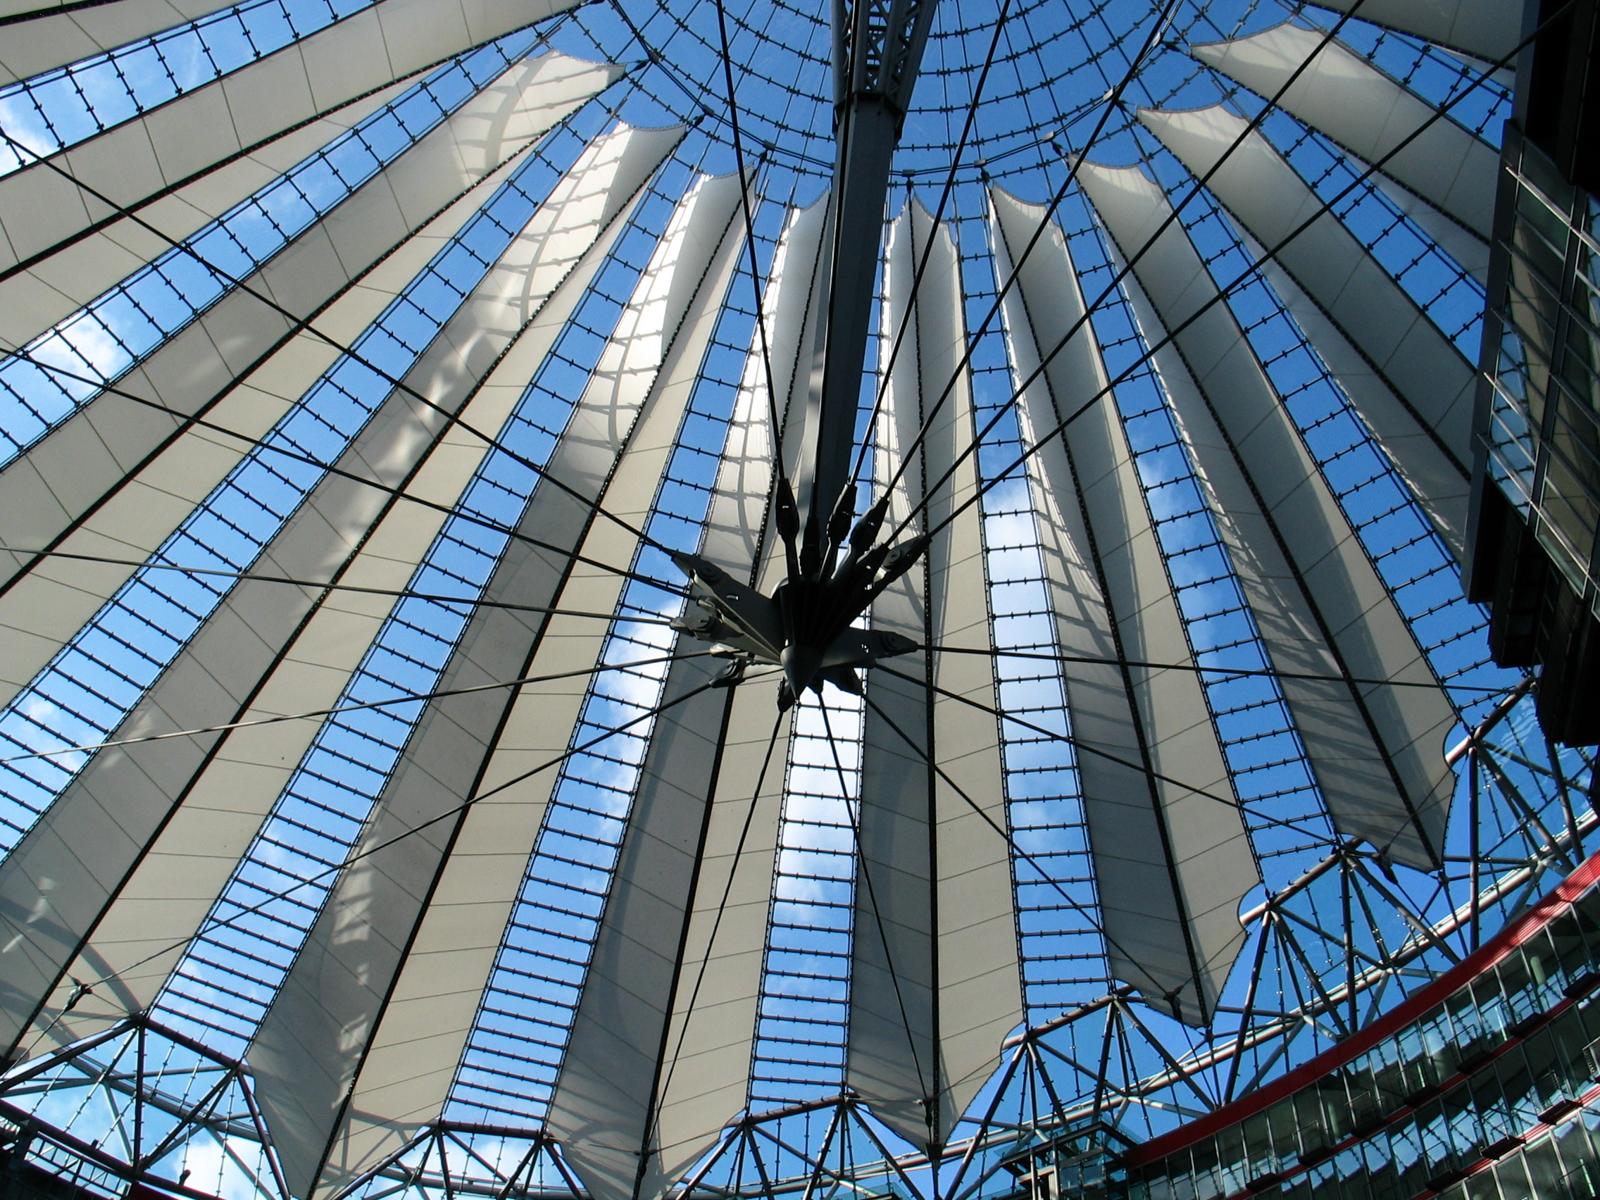 The roof of the Sony Centre